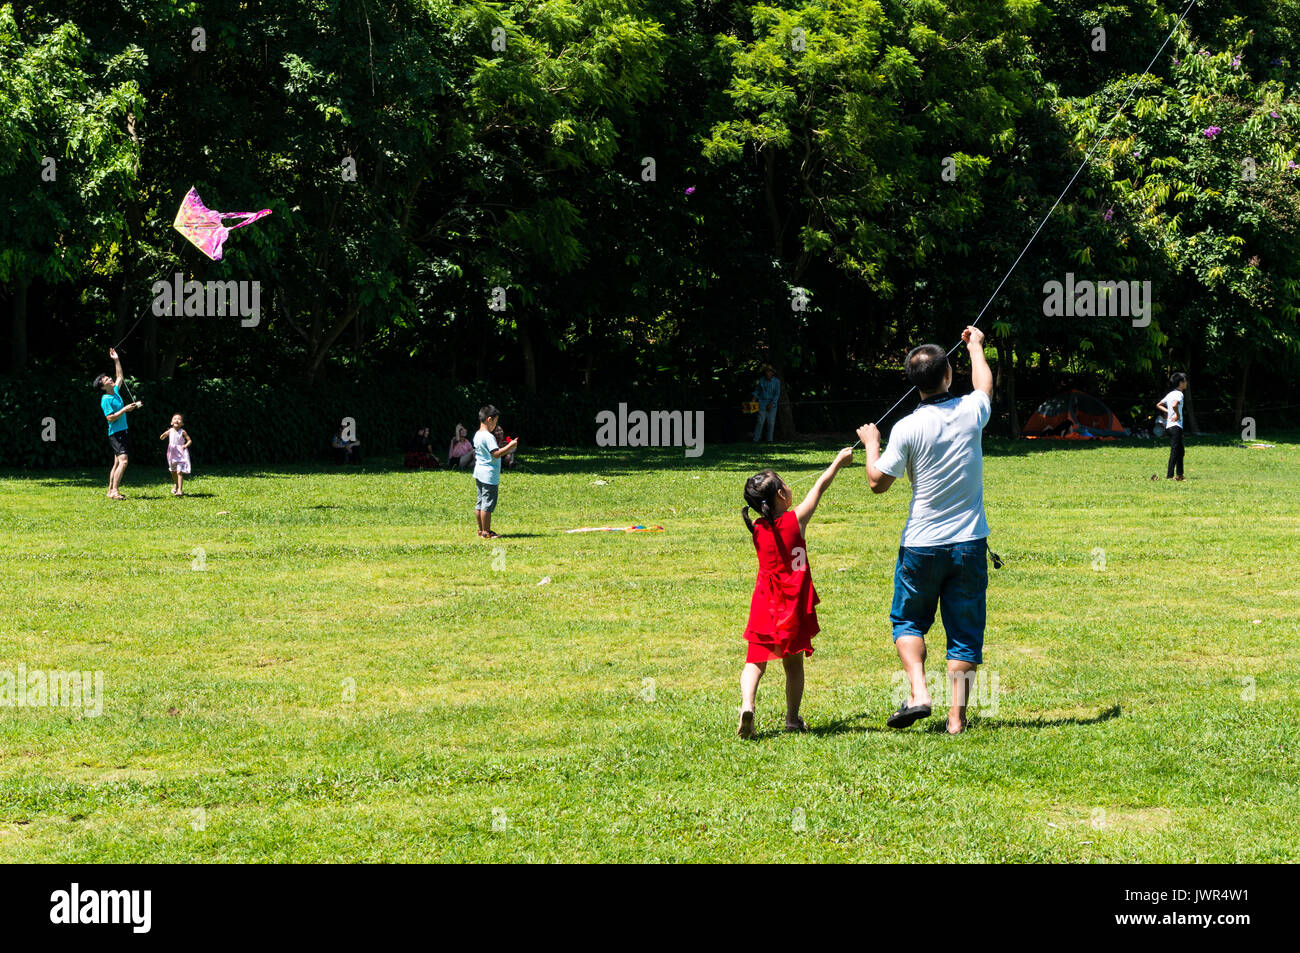 Father and daughter, likely middle class Chinese, fly a kite together at Lianhuashan Park on a sunny afternoon in Shenzhen, China Stock Photo